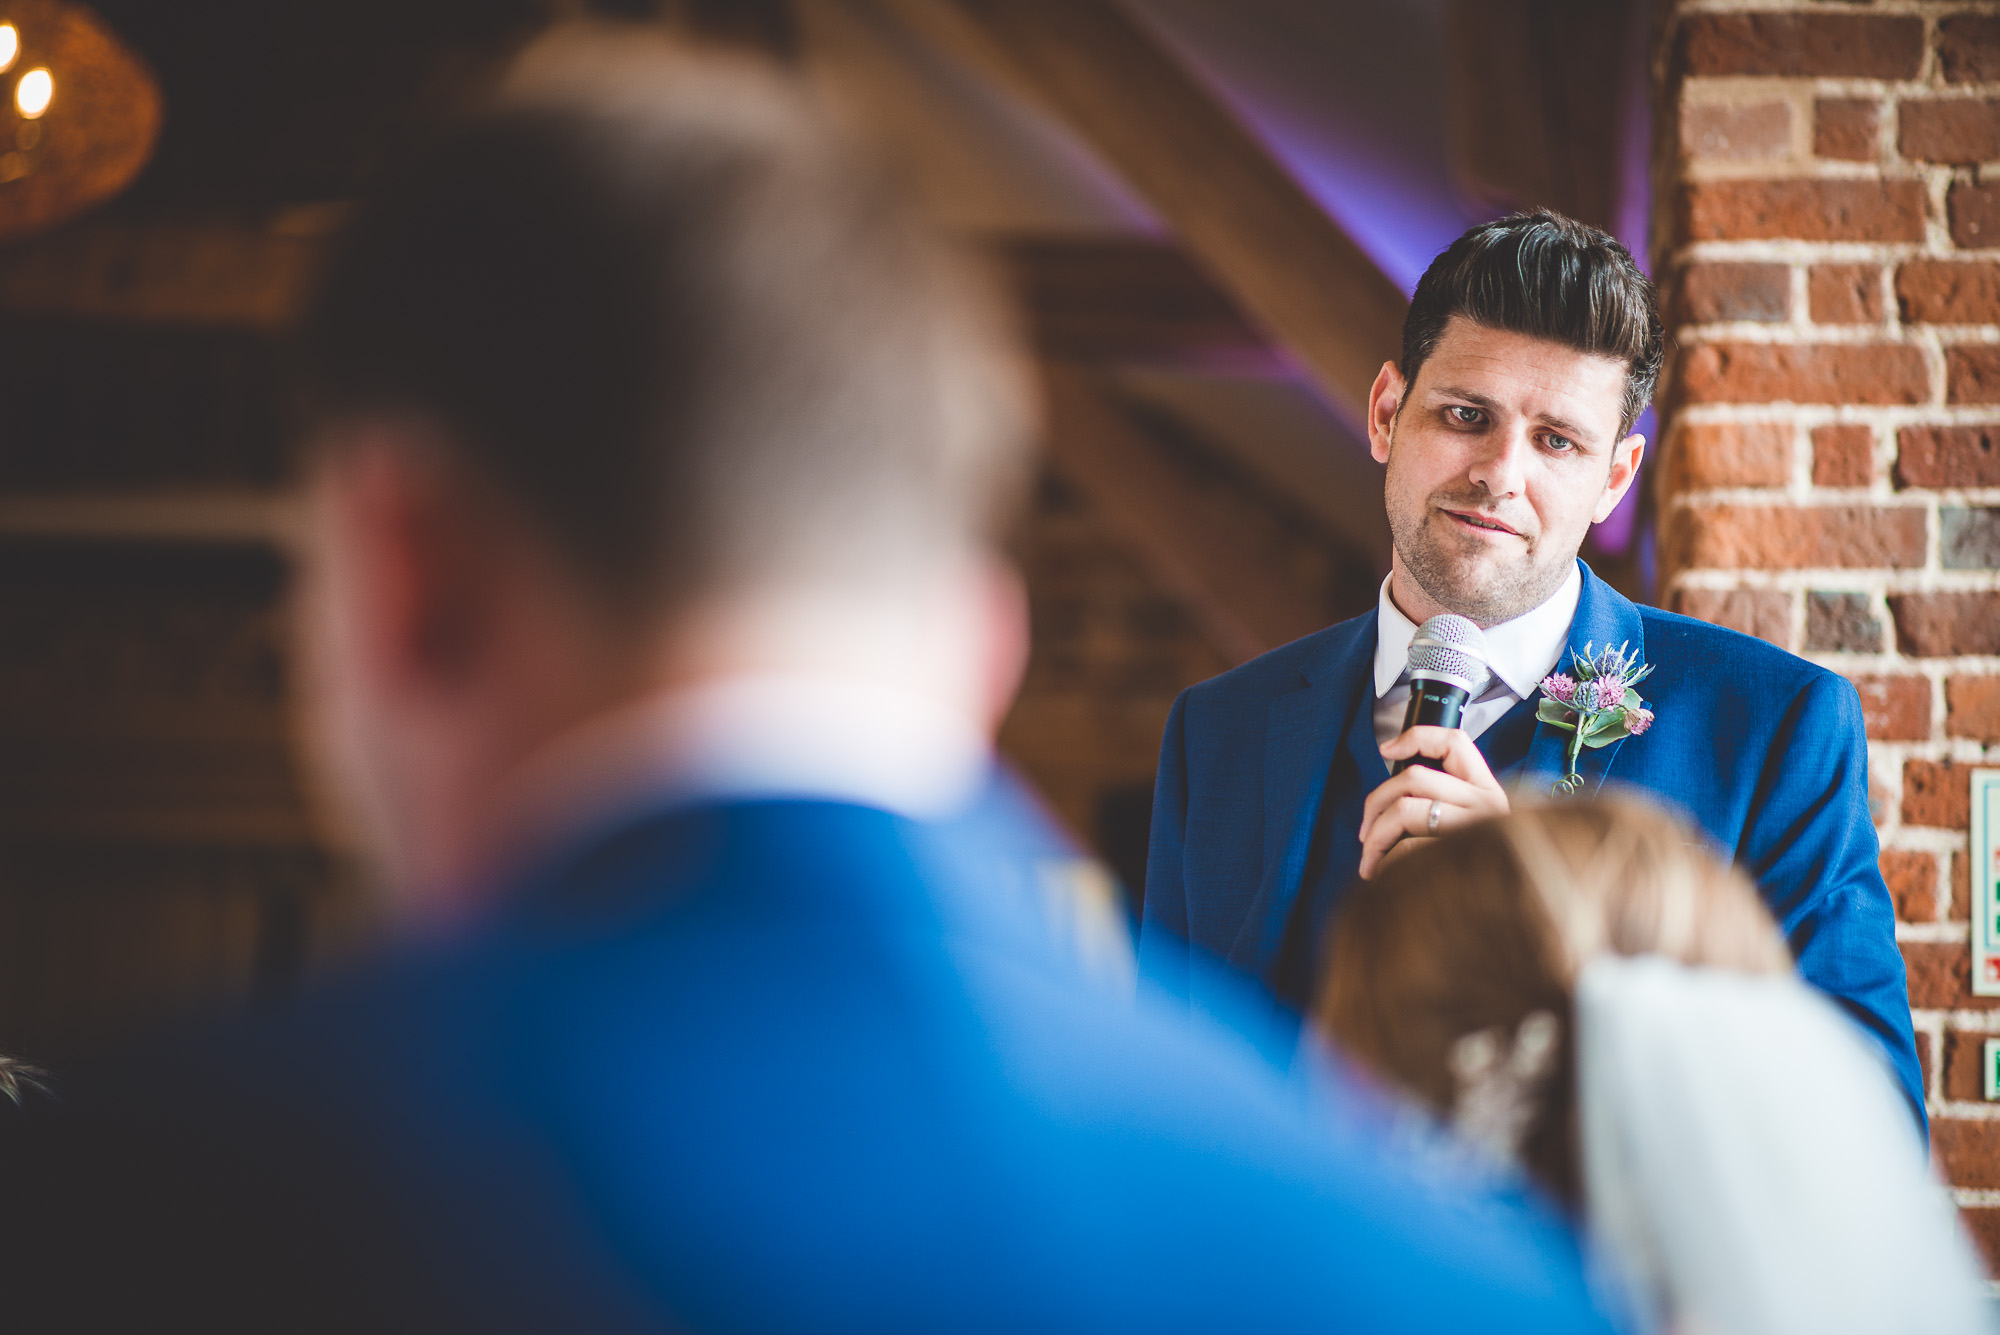 A groom in a blue suit giving a speech at a wedding.